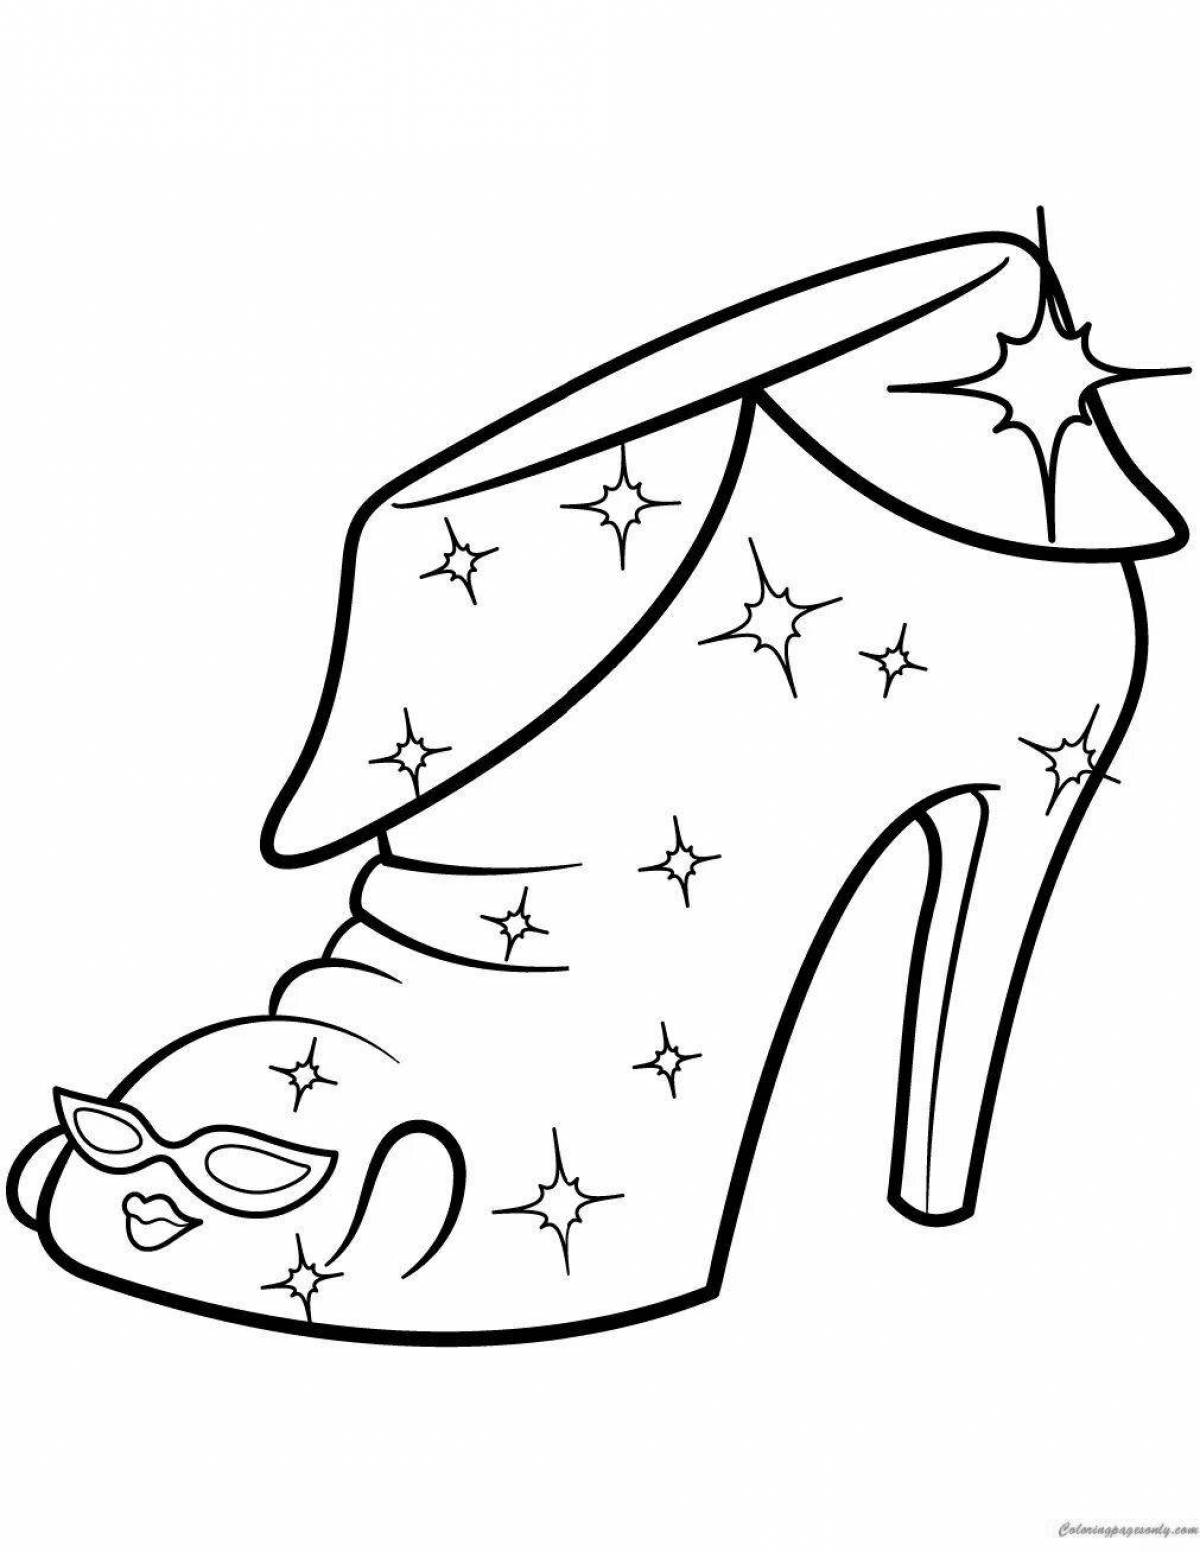 Coloring page joyful shoes for girls